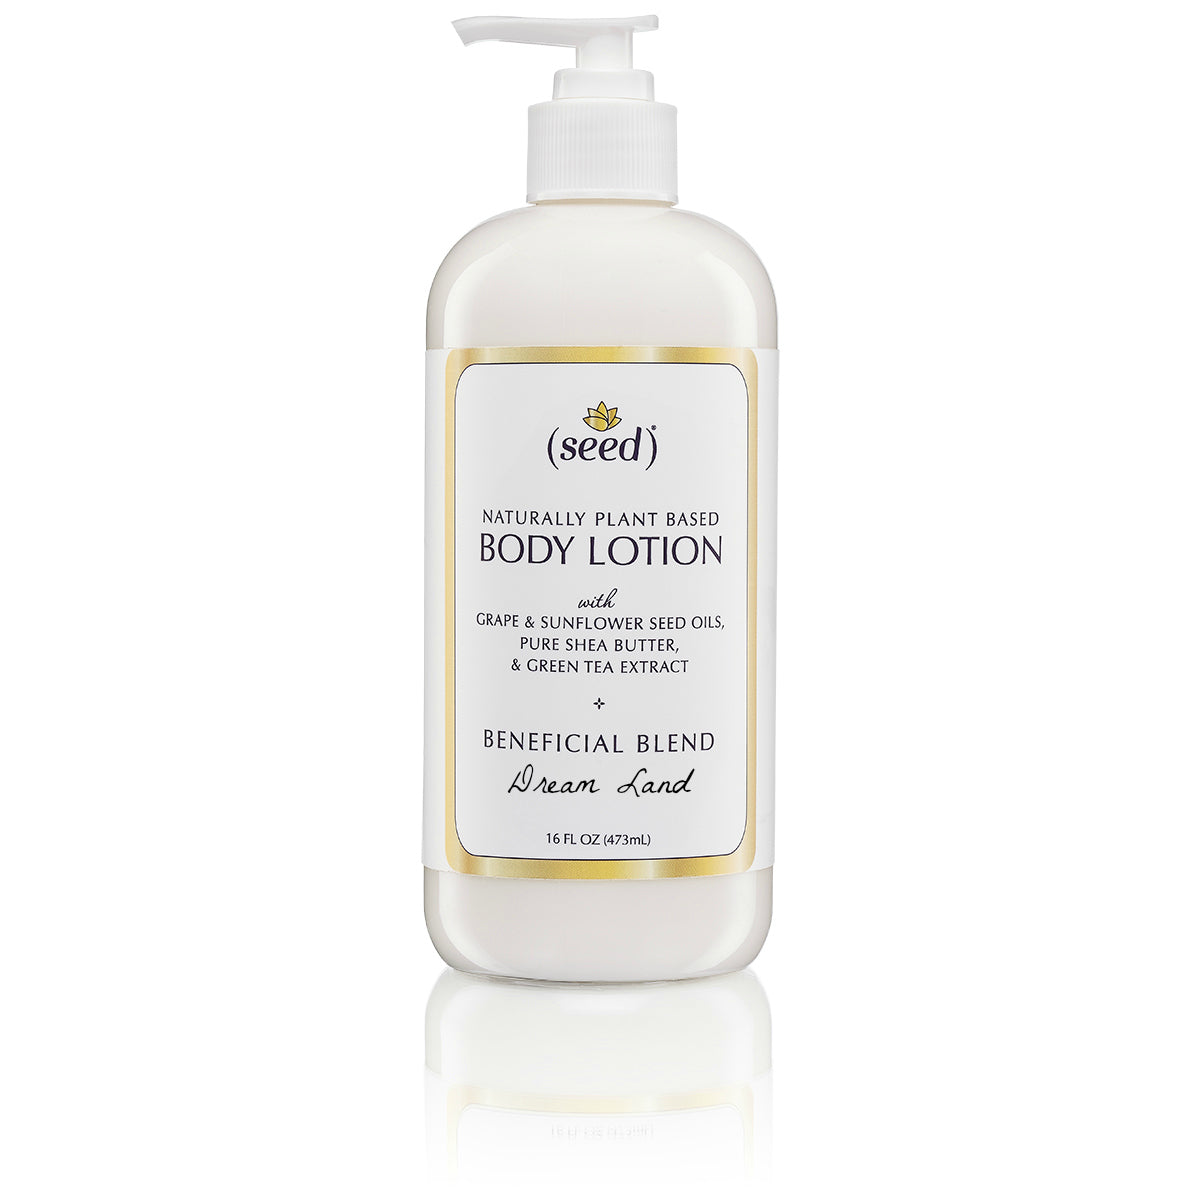 Seed Dream Land Blend Body Lotion features essential oils of lemon, lavender, and ginger